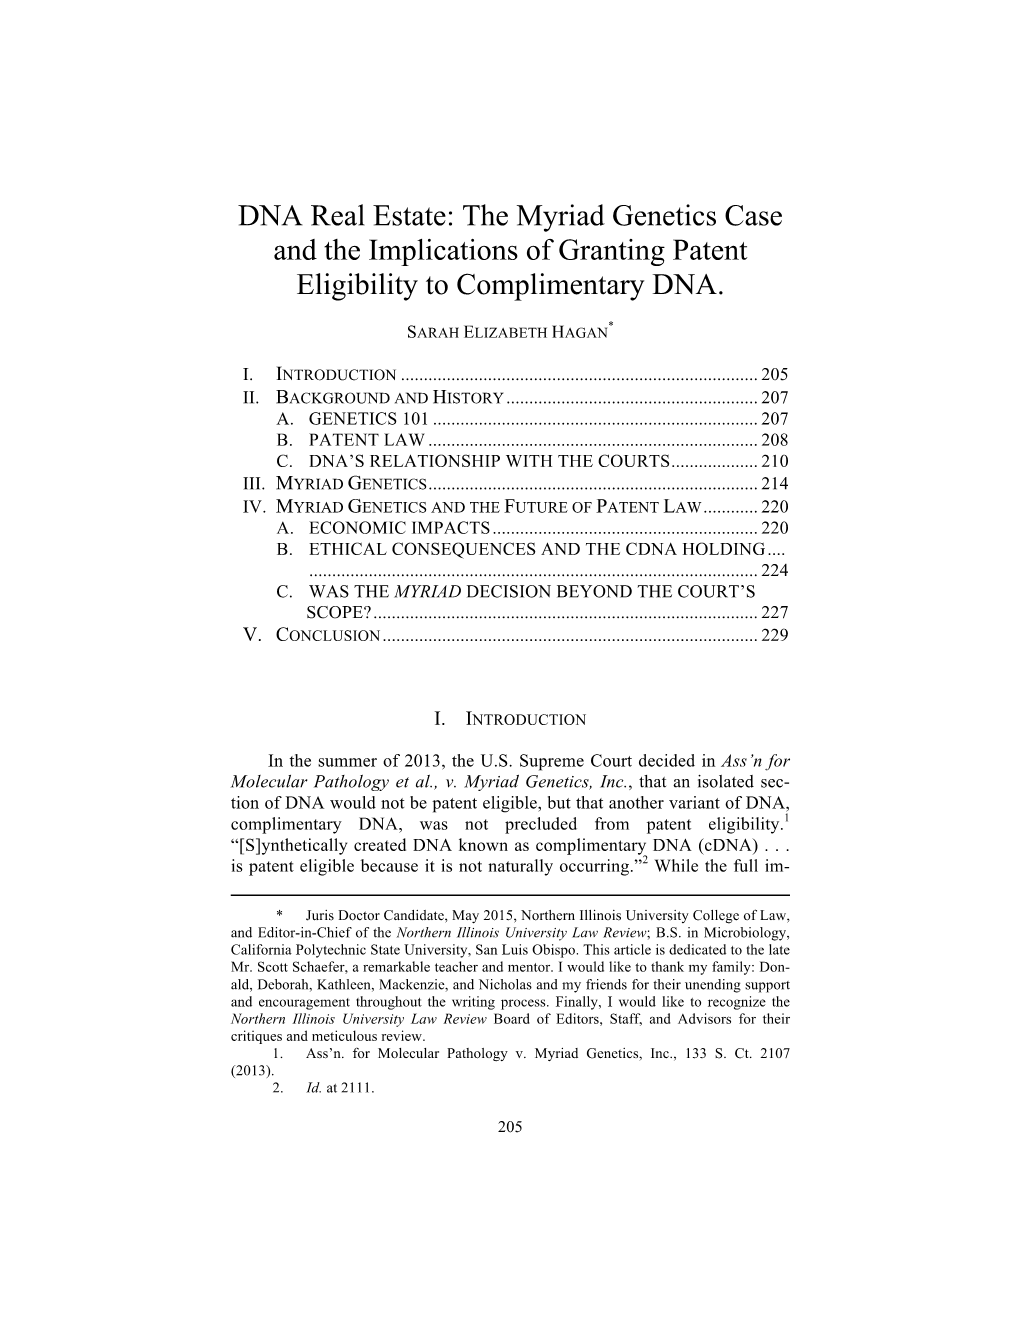 DNA Real Estate: the Myriad Genetics Case and the Implications of Granting Patent Eligibility to Complimentary DNA